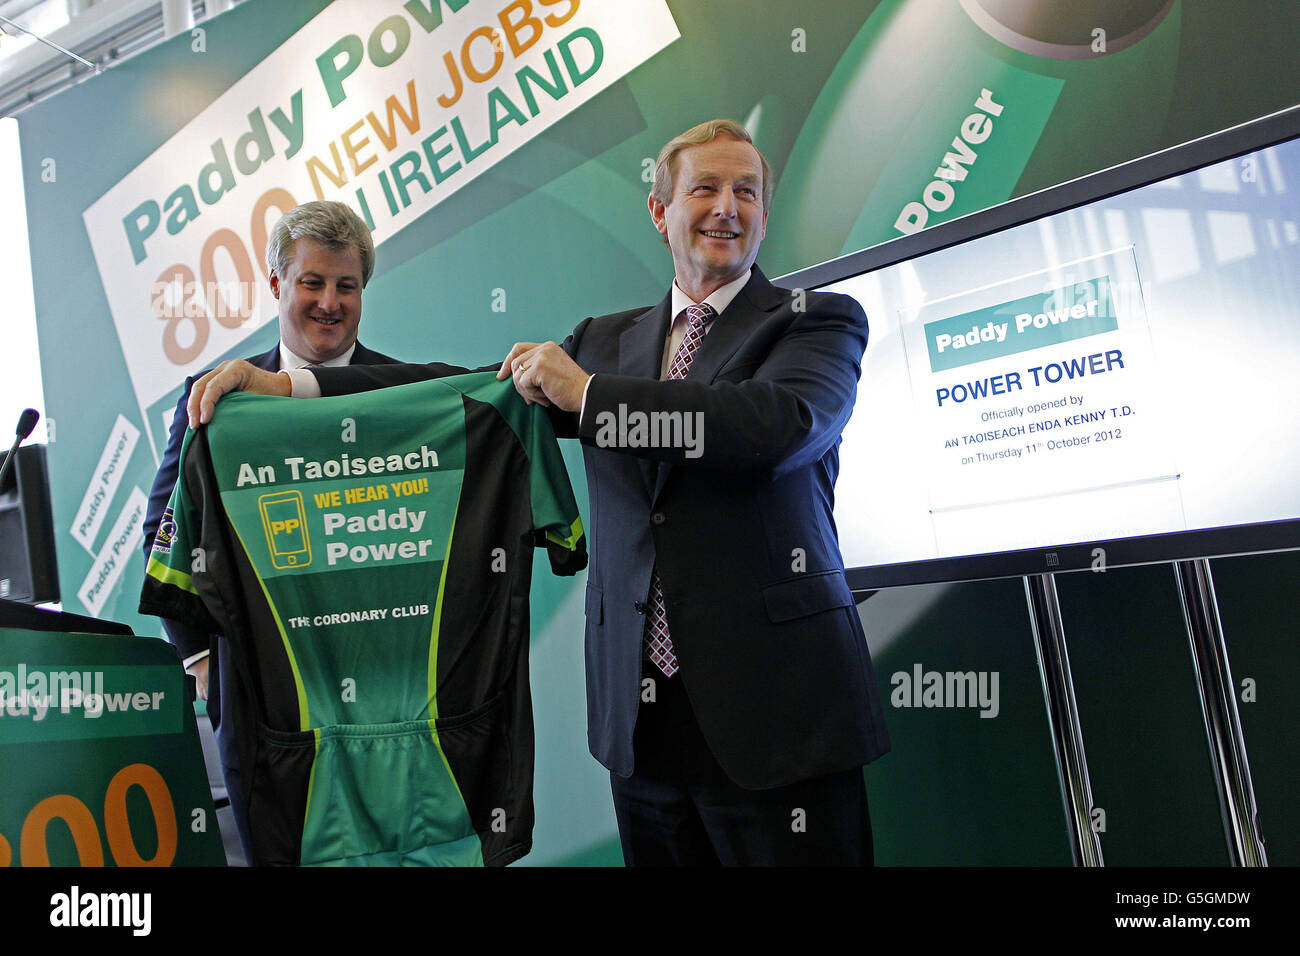 Taoiseach Enda Kenny is presented with a Paddy Power cycling jersey by Patrick Kennedy CEO at the official opening of Power Tower, the company's new headquarters for the bookmaker Paddy Power in Clonskeagh, Dublin, where the company also announced the creation of 600 new jobs. Stock Photo